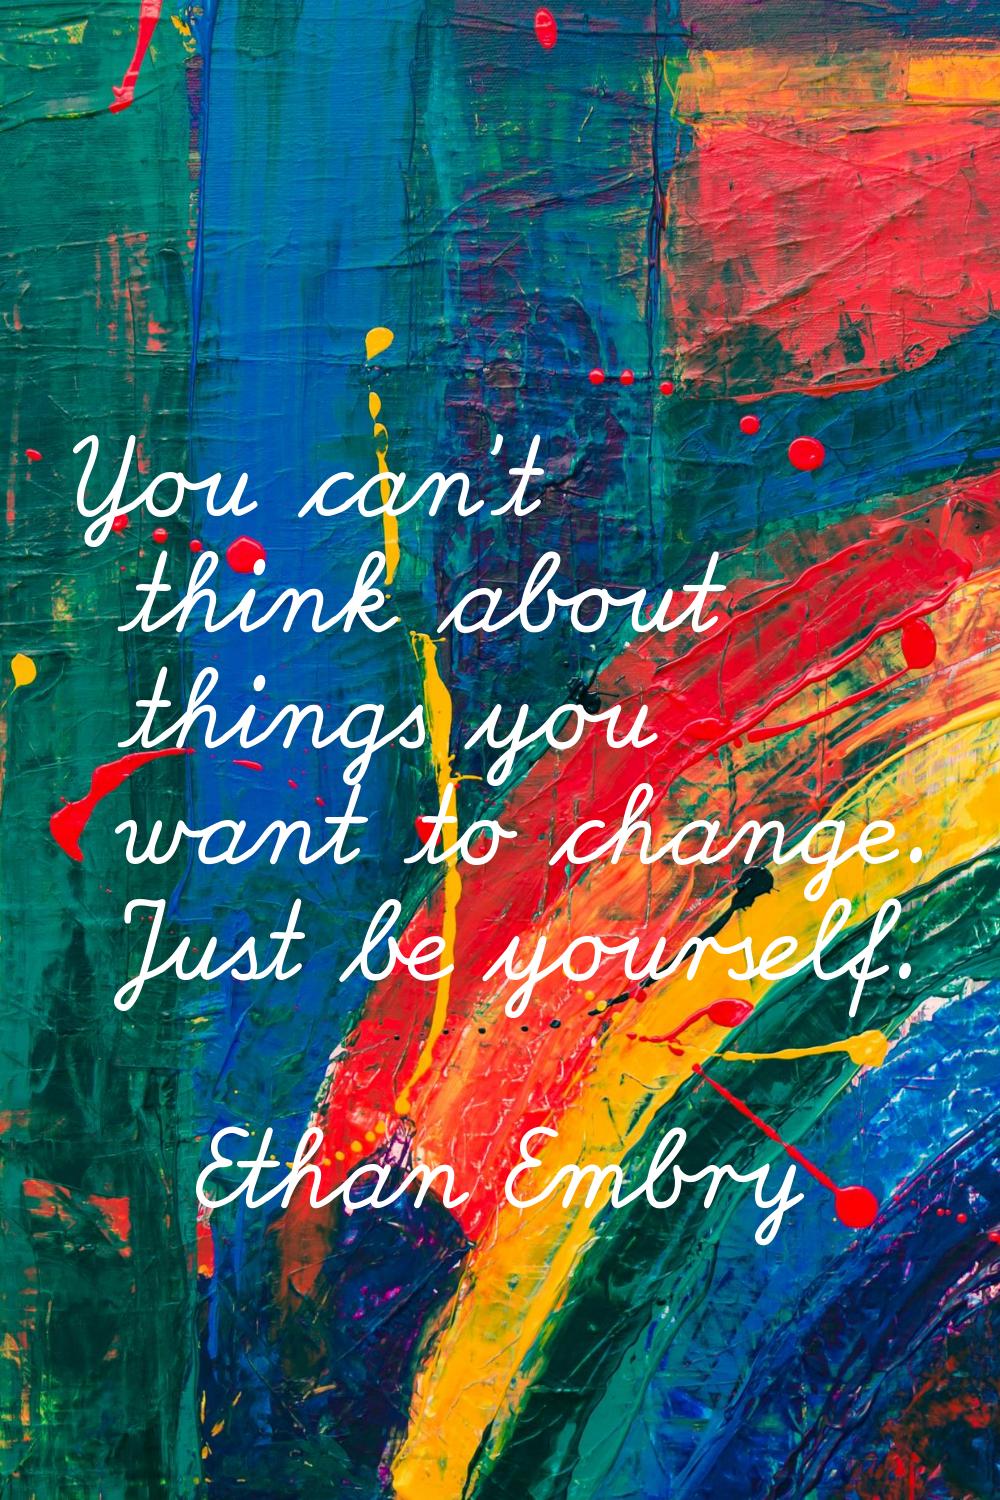 You can't think about things you want to change. Just be yourself.